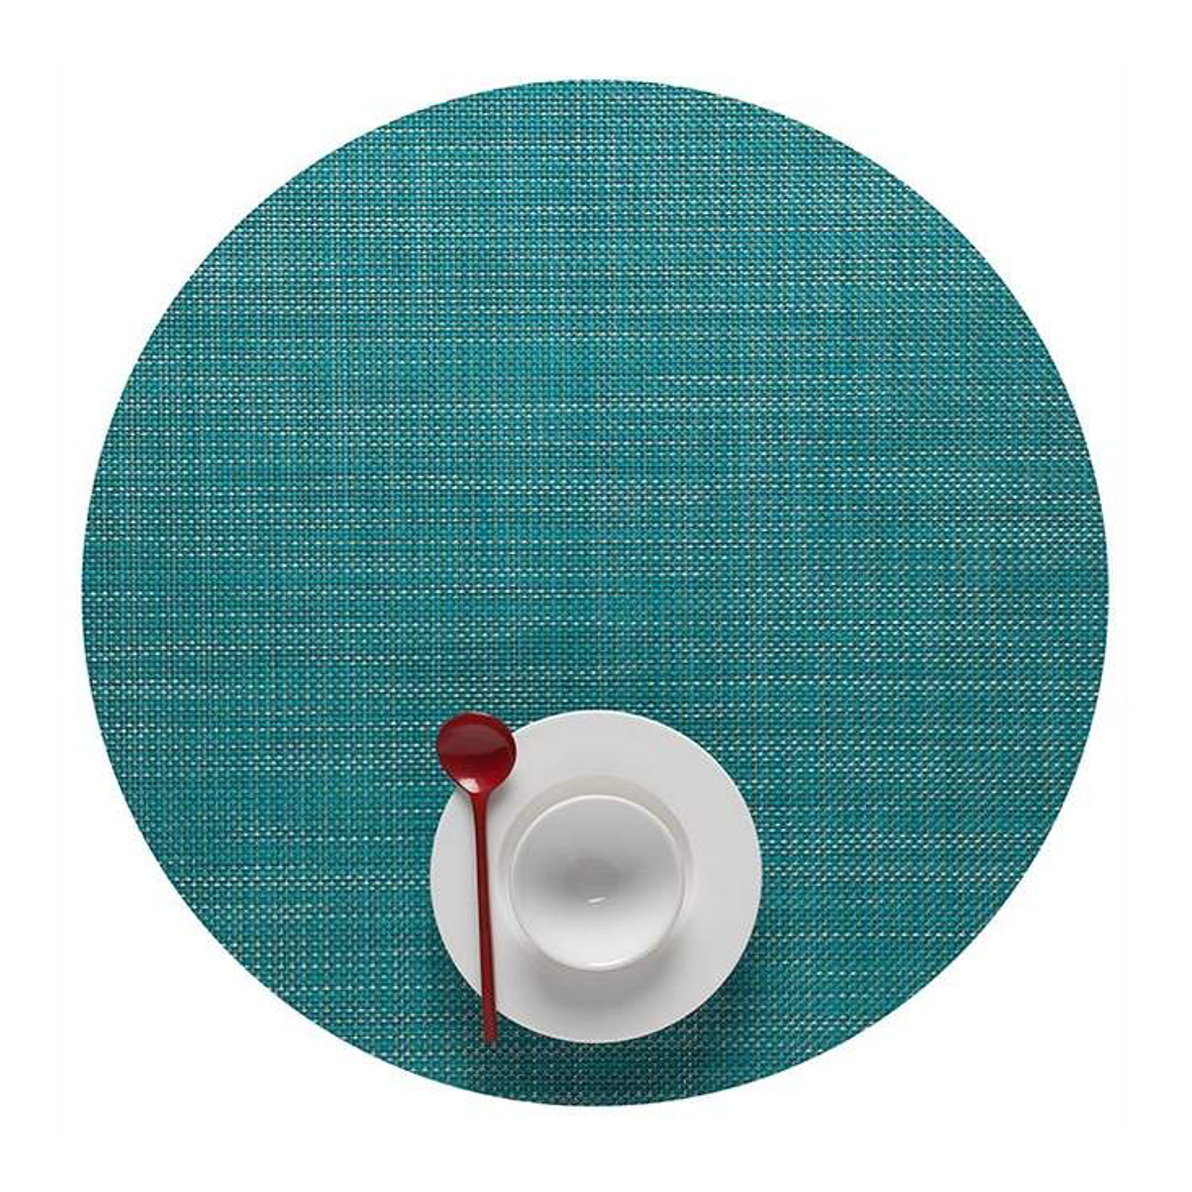 Chilewich Round Mini Basketweave Placemat - Turquoise